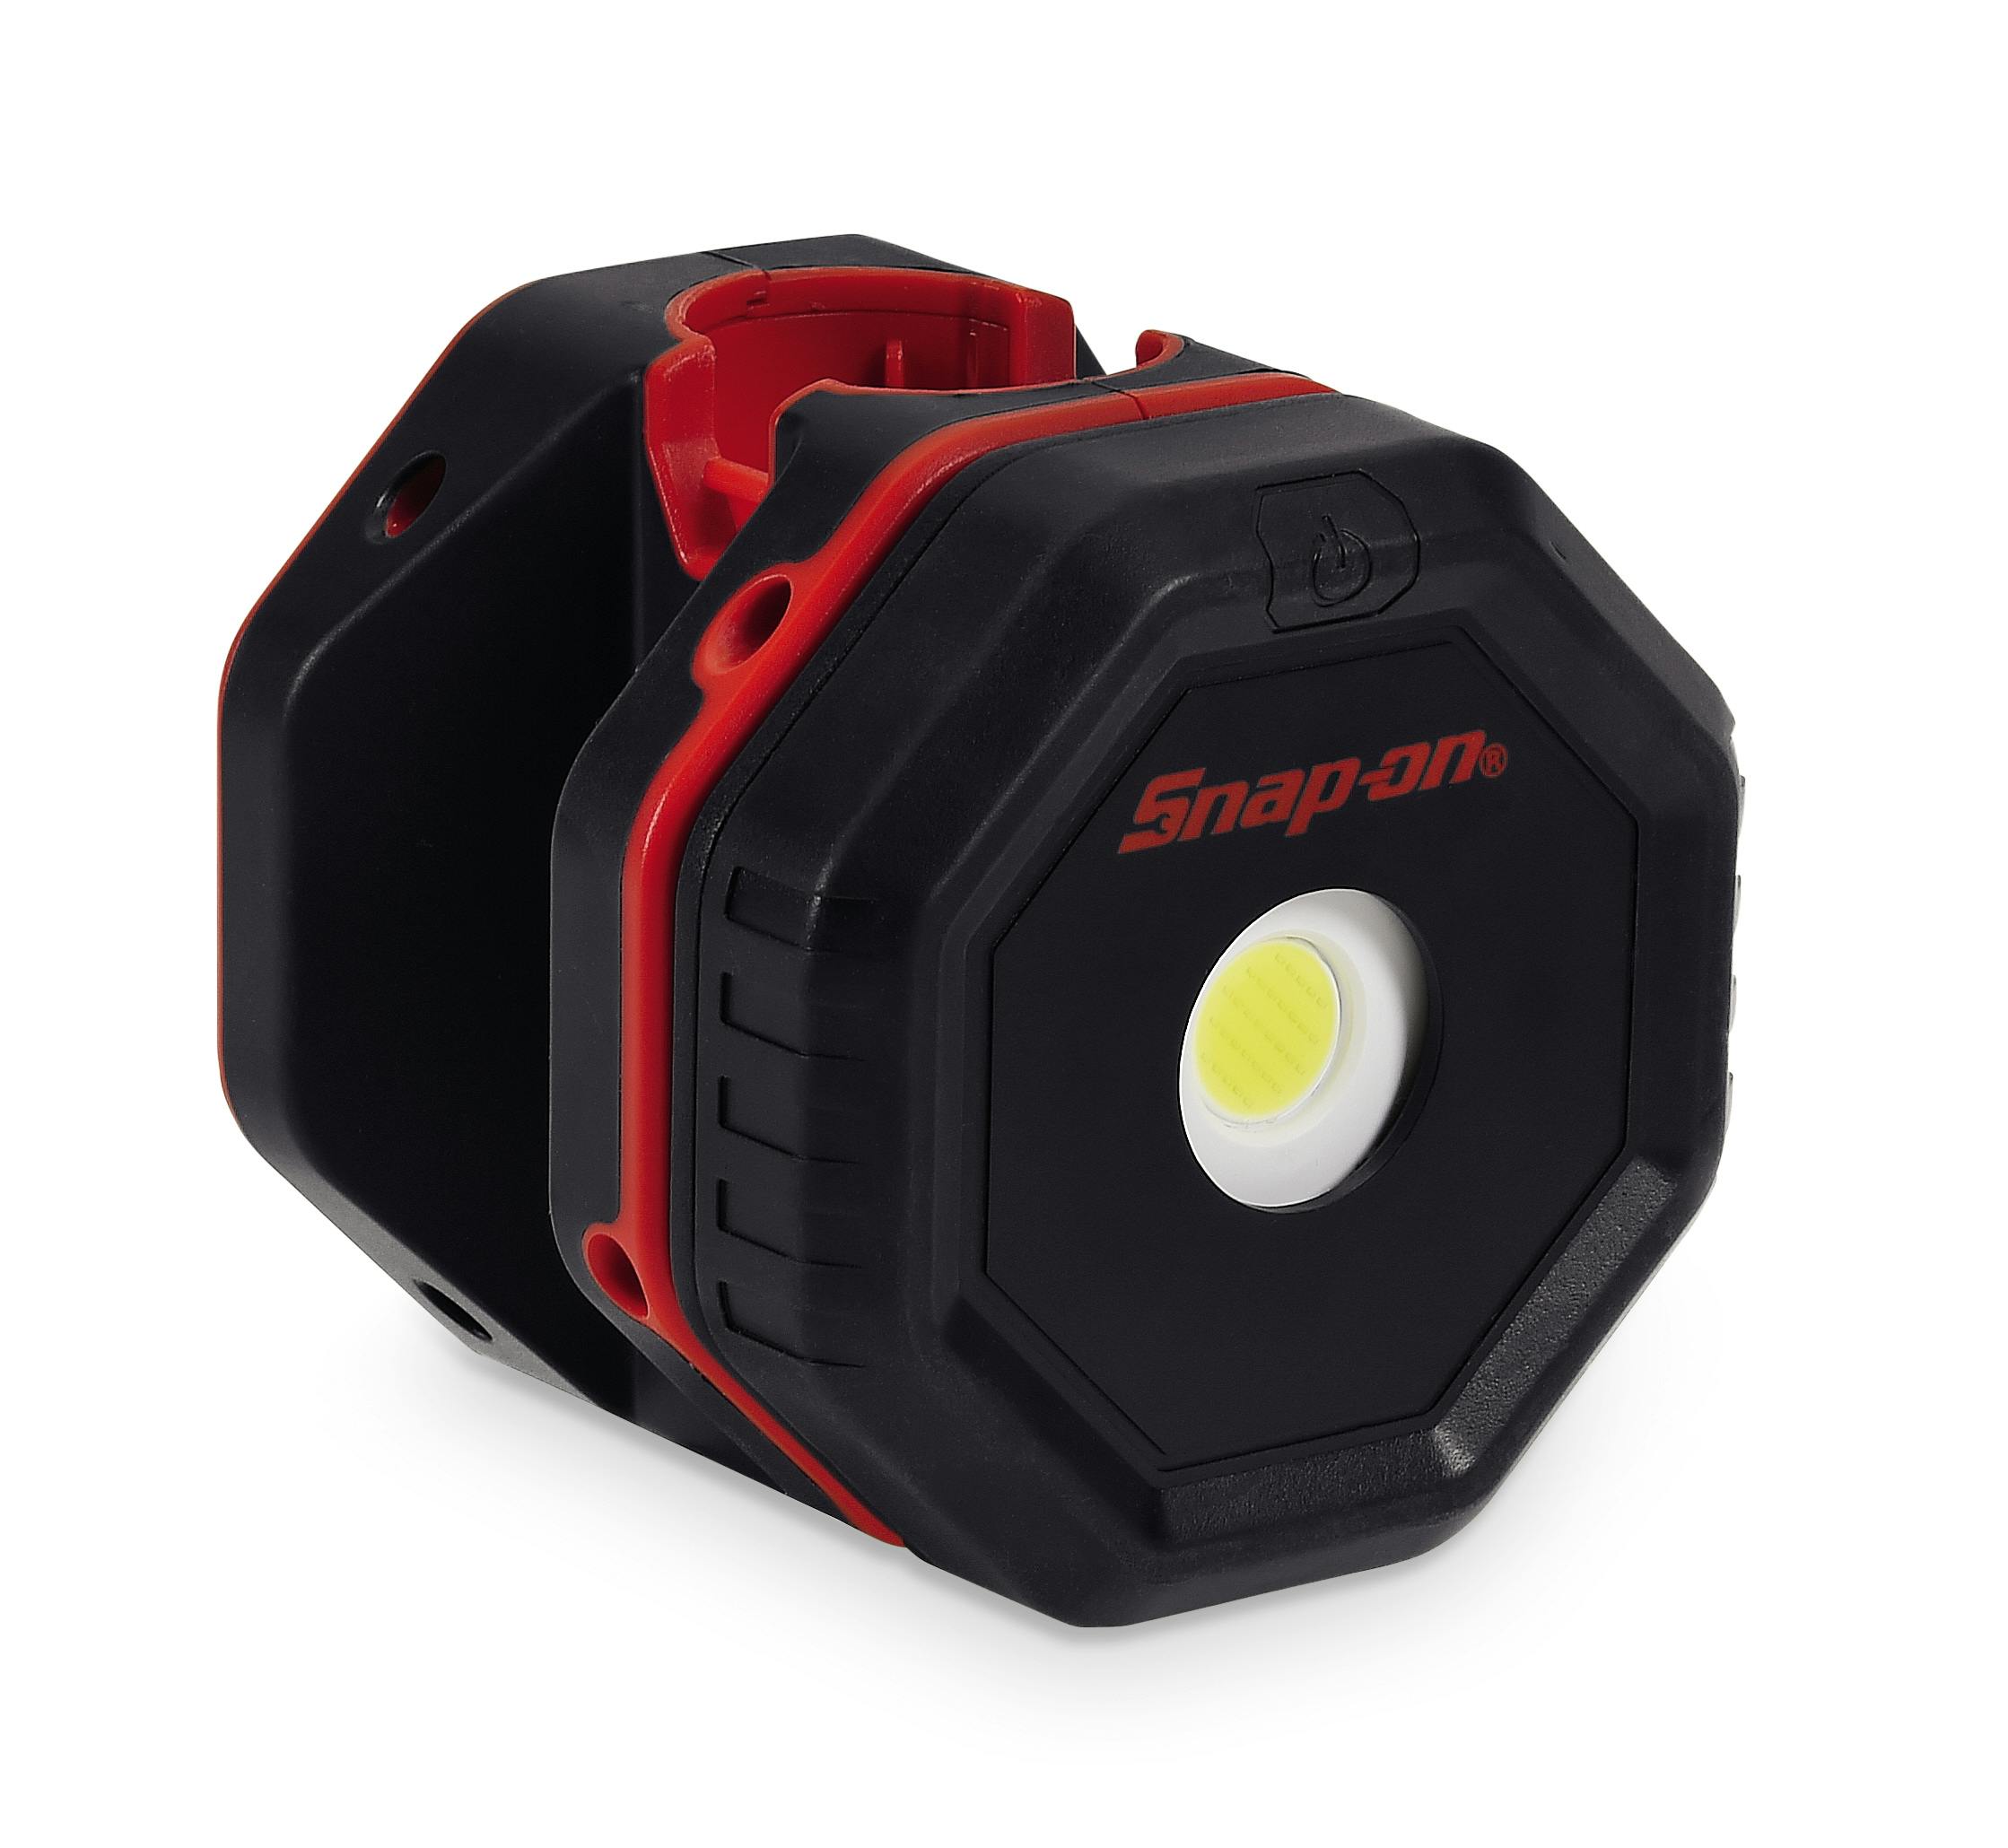 14.4 V MicroLithium Cordless Floodlight (Tool Only) (Red 